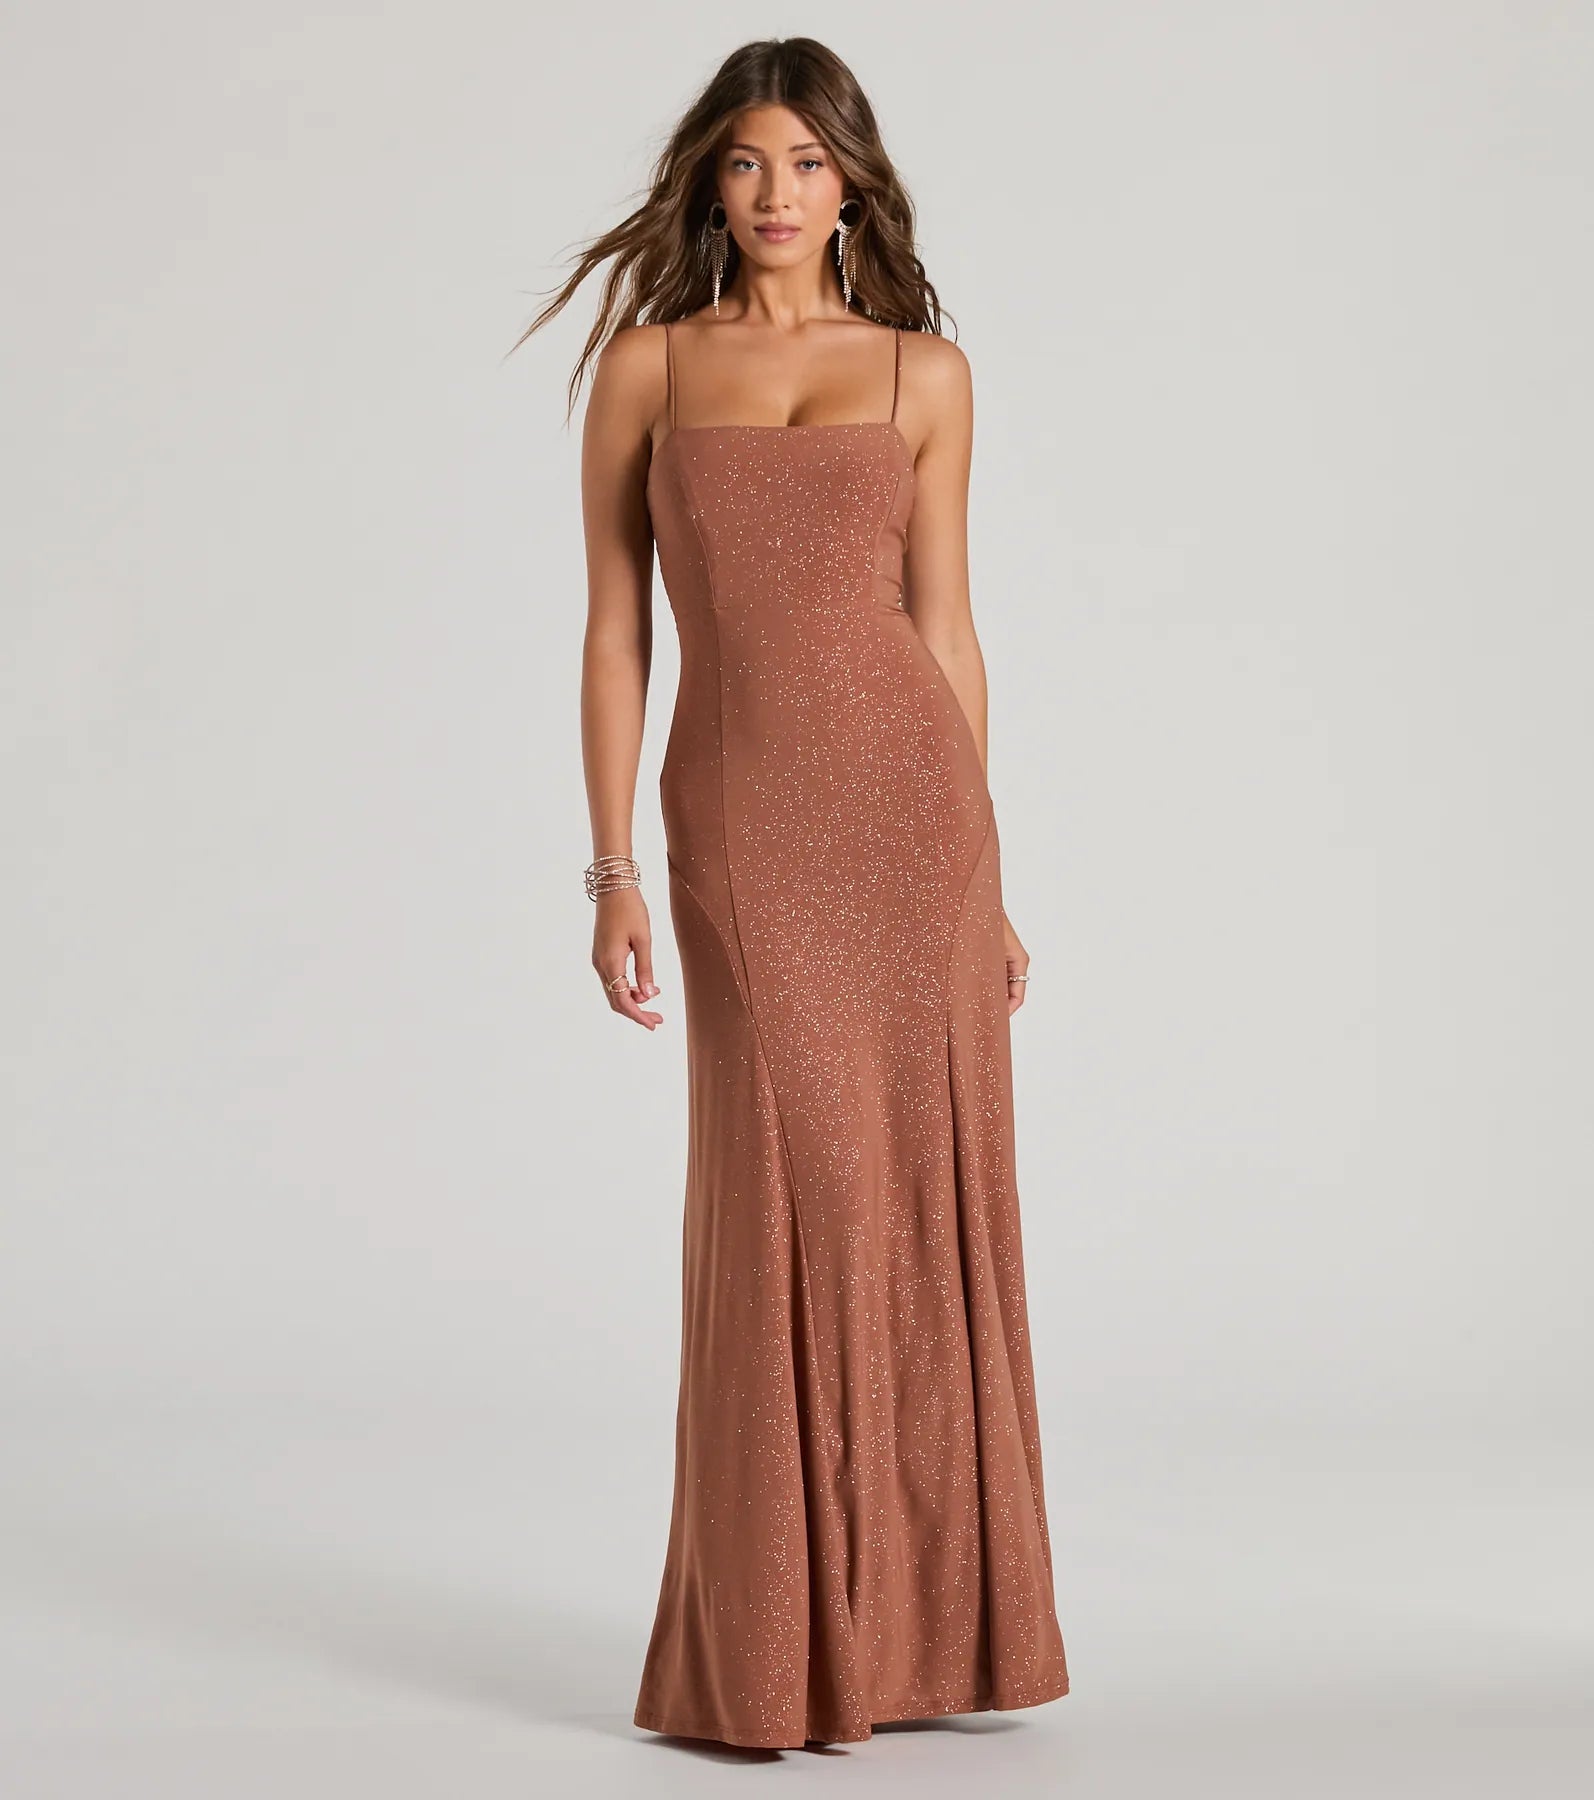 A-line Sleeveless Spaghetti Strap Glittering Stretchy Floor Length Square Neck Knit Party Dress